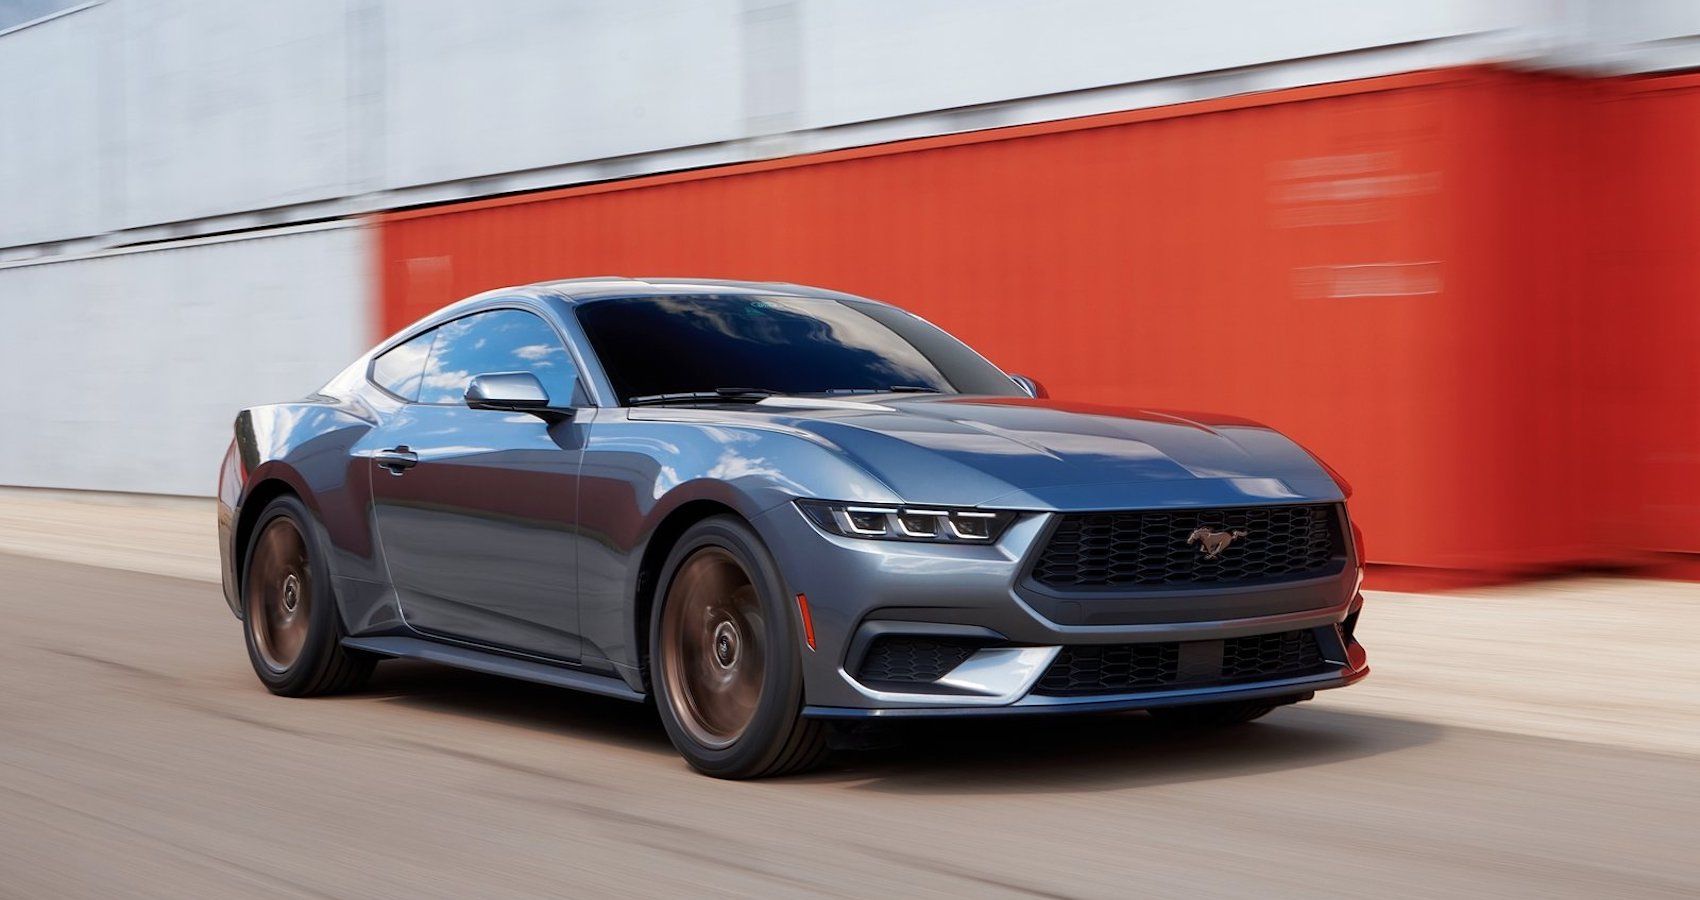 10 Things We Just Learned About Ford's New Mustang